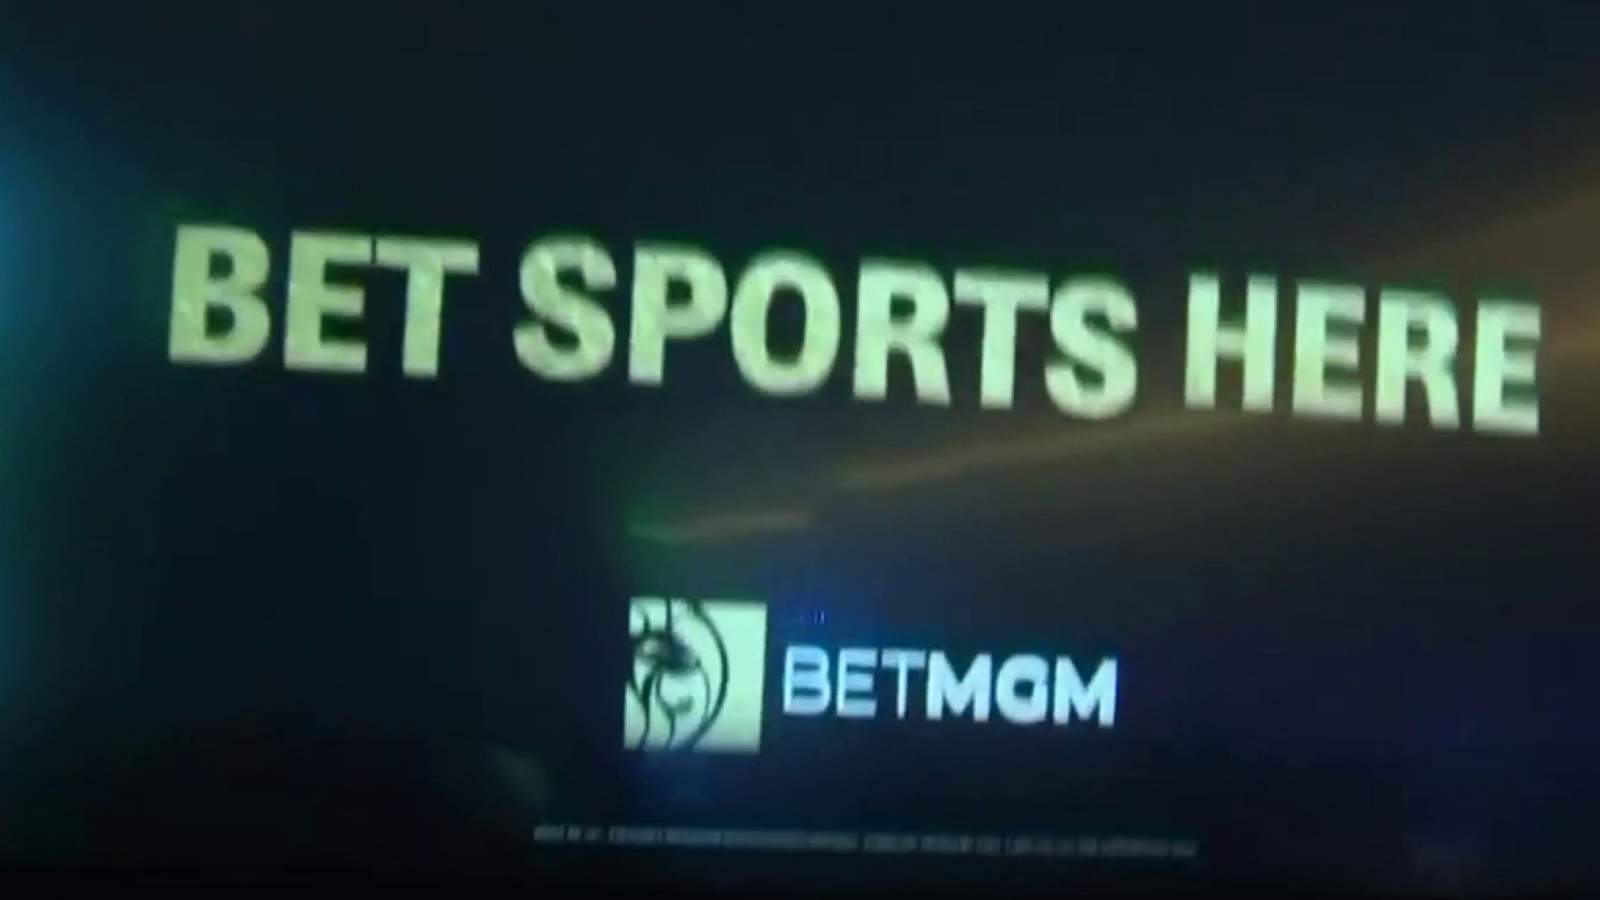 Detroit casinos begin taking legal bets on sporting events